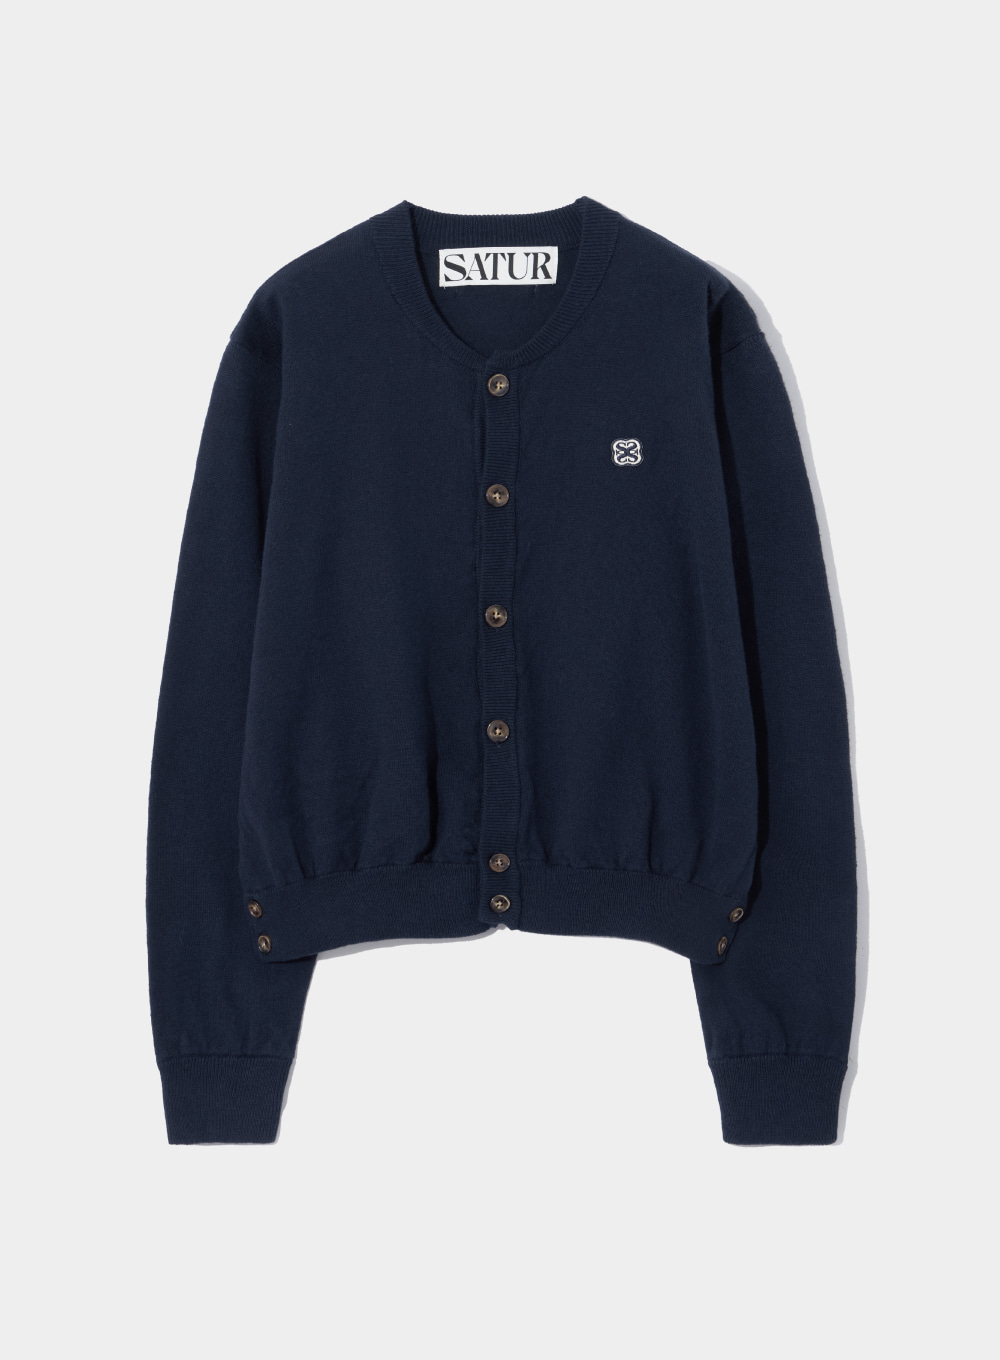 (W) All Day Satur Cotton Cashmere Blend Cardigan - Classic Navy